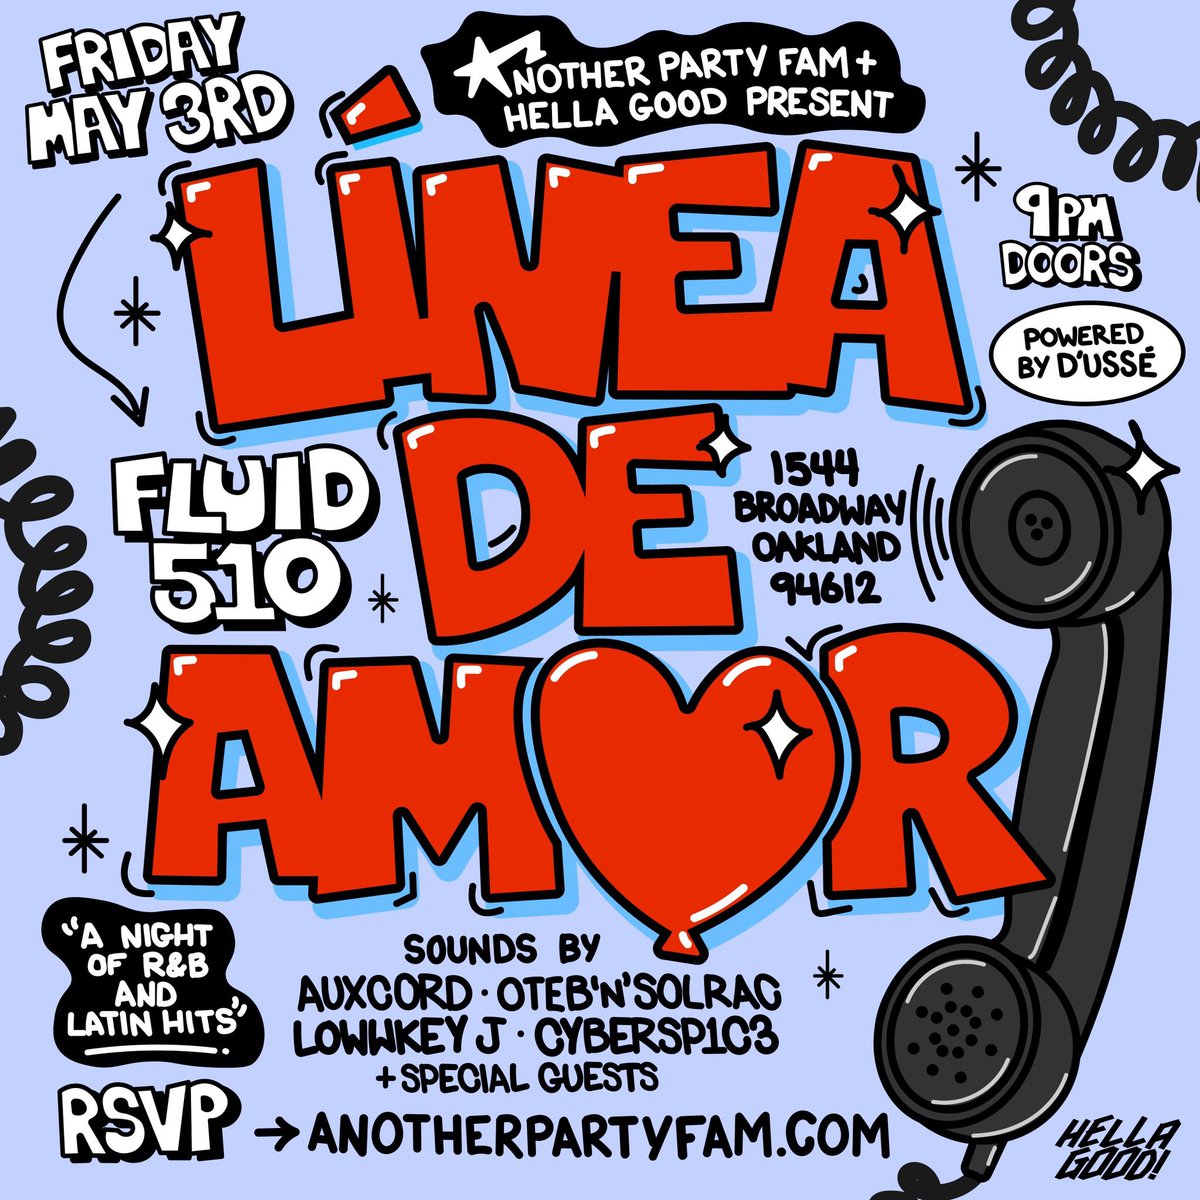 🚨 FULL LINE UP ANNOUNCEMENT 🚨

Hella Good and APF clickin up this Friday in Oakland to give you, Linea De Amor: R&B shlaps and Latin bangers 🔊  9pm Doors 🚪 

AUXCORD 
OTEBNSOLRAC
LOWWKEY J 
CYBERSP1C3 
+ Special Guests 

RSVP: shorturl.at/iquCO 

Fluid 510
1544 Broadway